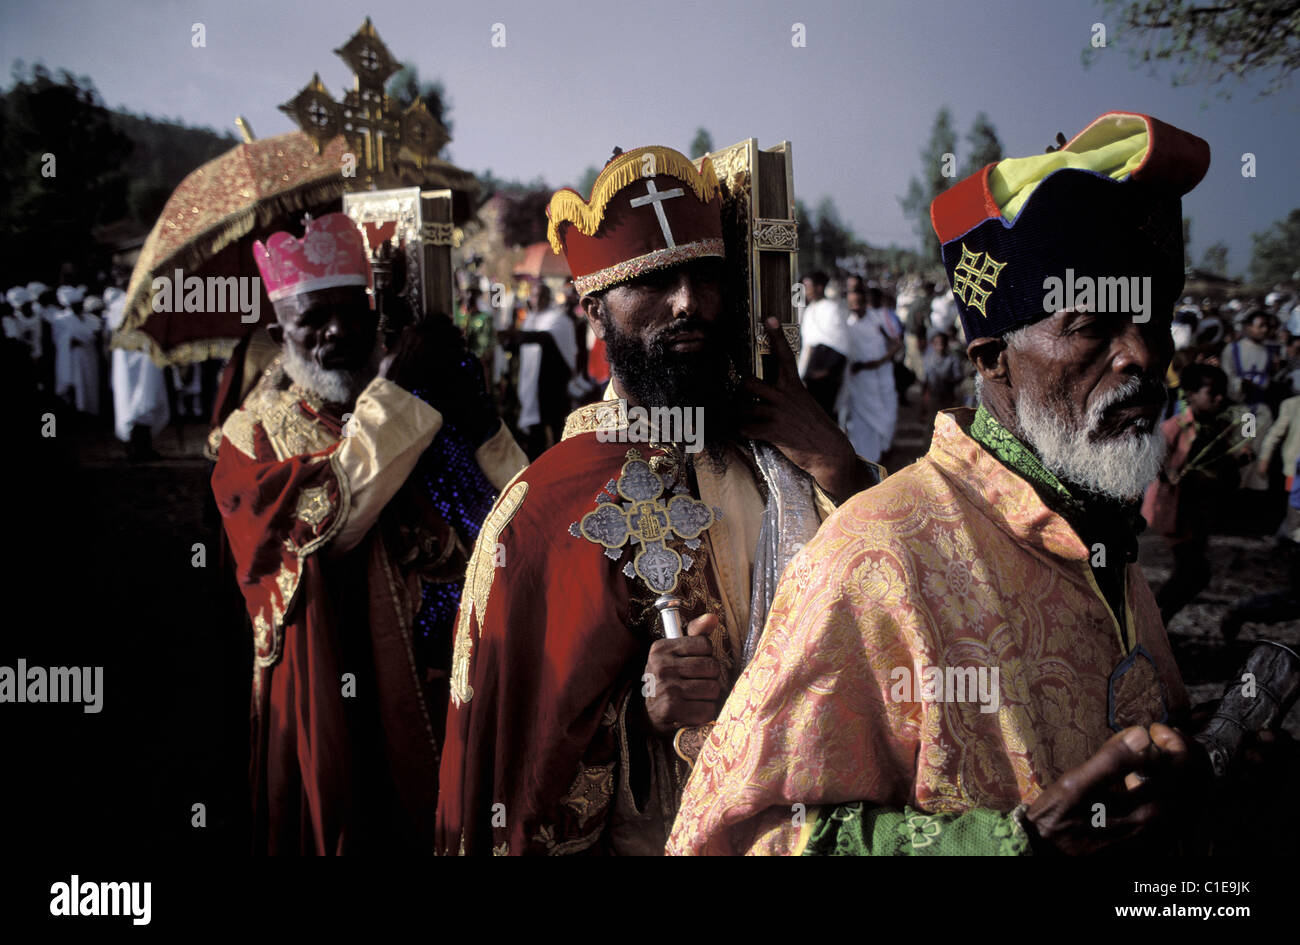 Ethiopia, region of Tigre, City of Axoum, Procession of the Olive Branches Celebration Stock Photo